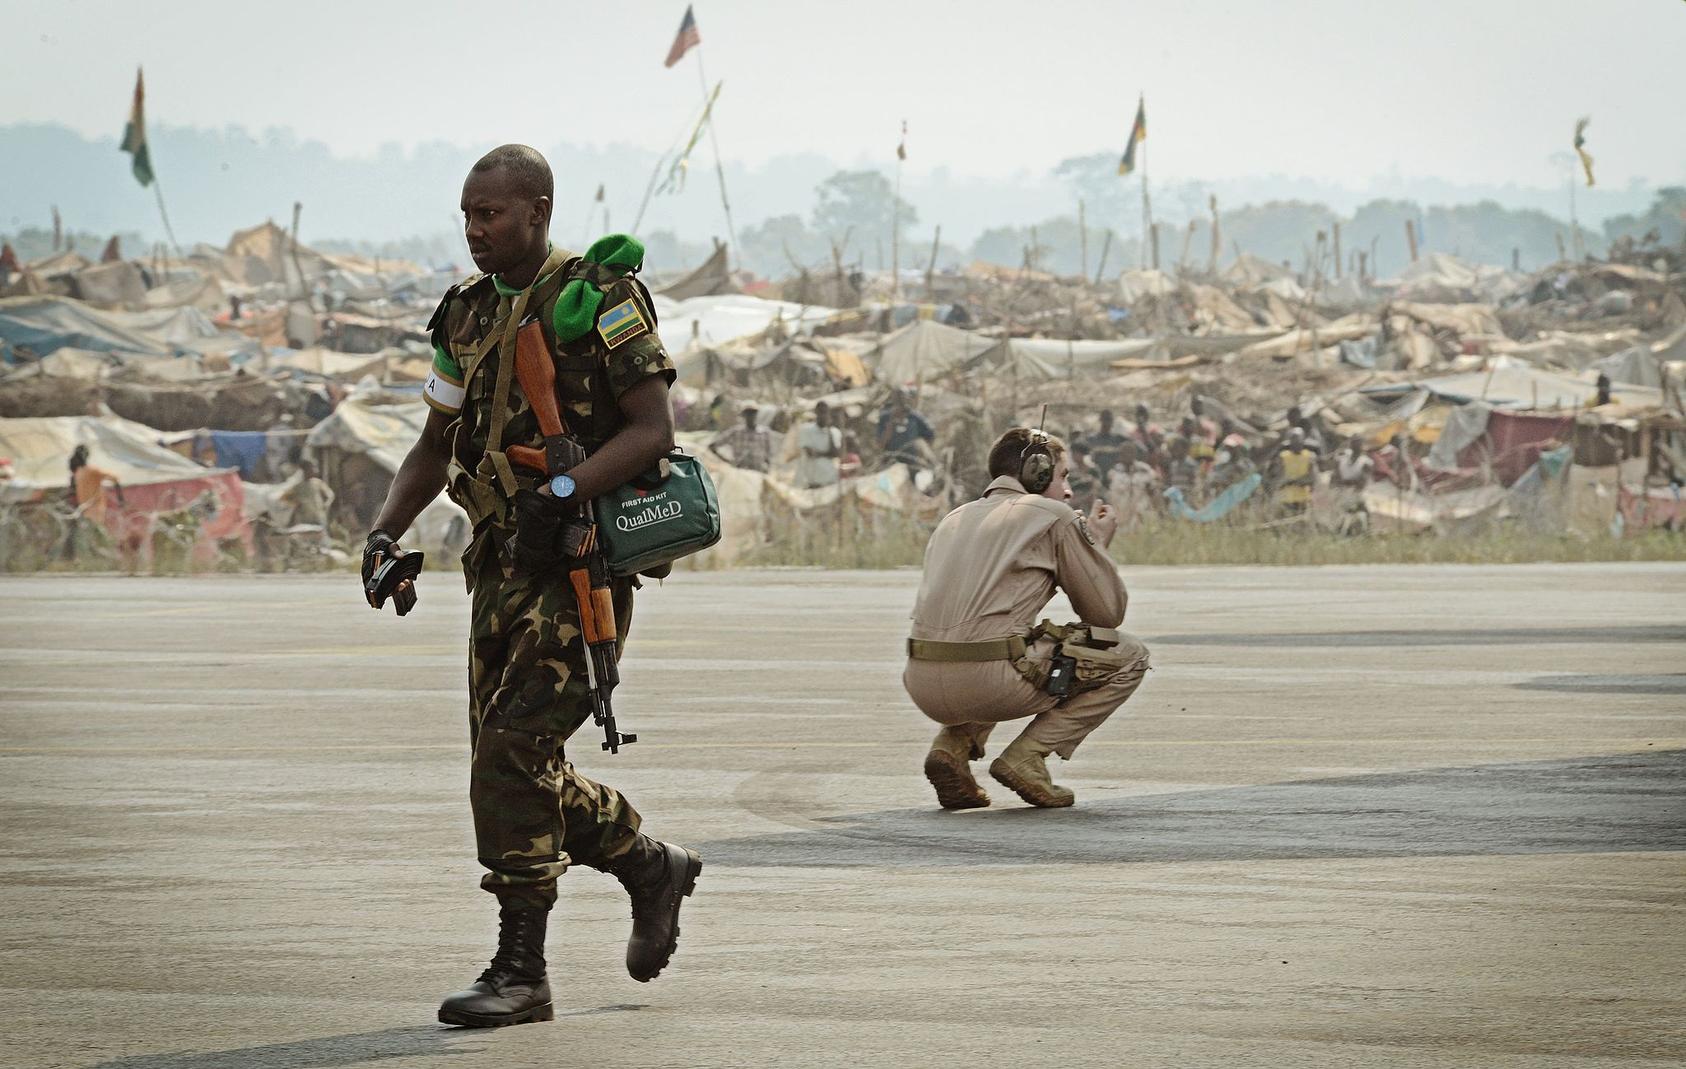 An African Union soldier and U.S. airman share the tarmac of the Central African Republic’s main airport as refugees from the CAR’s war watch peacekeepers’ arrival in 2014. Photo courtesy of DIMOC/SSgt Ryan Crane